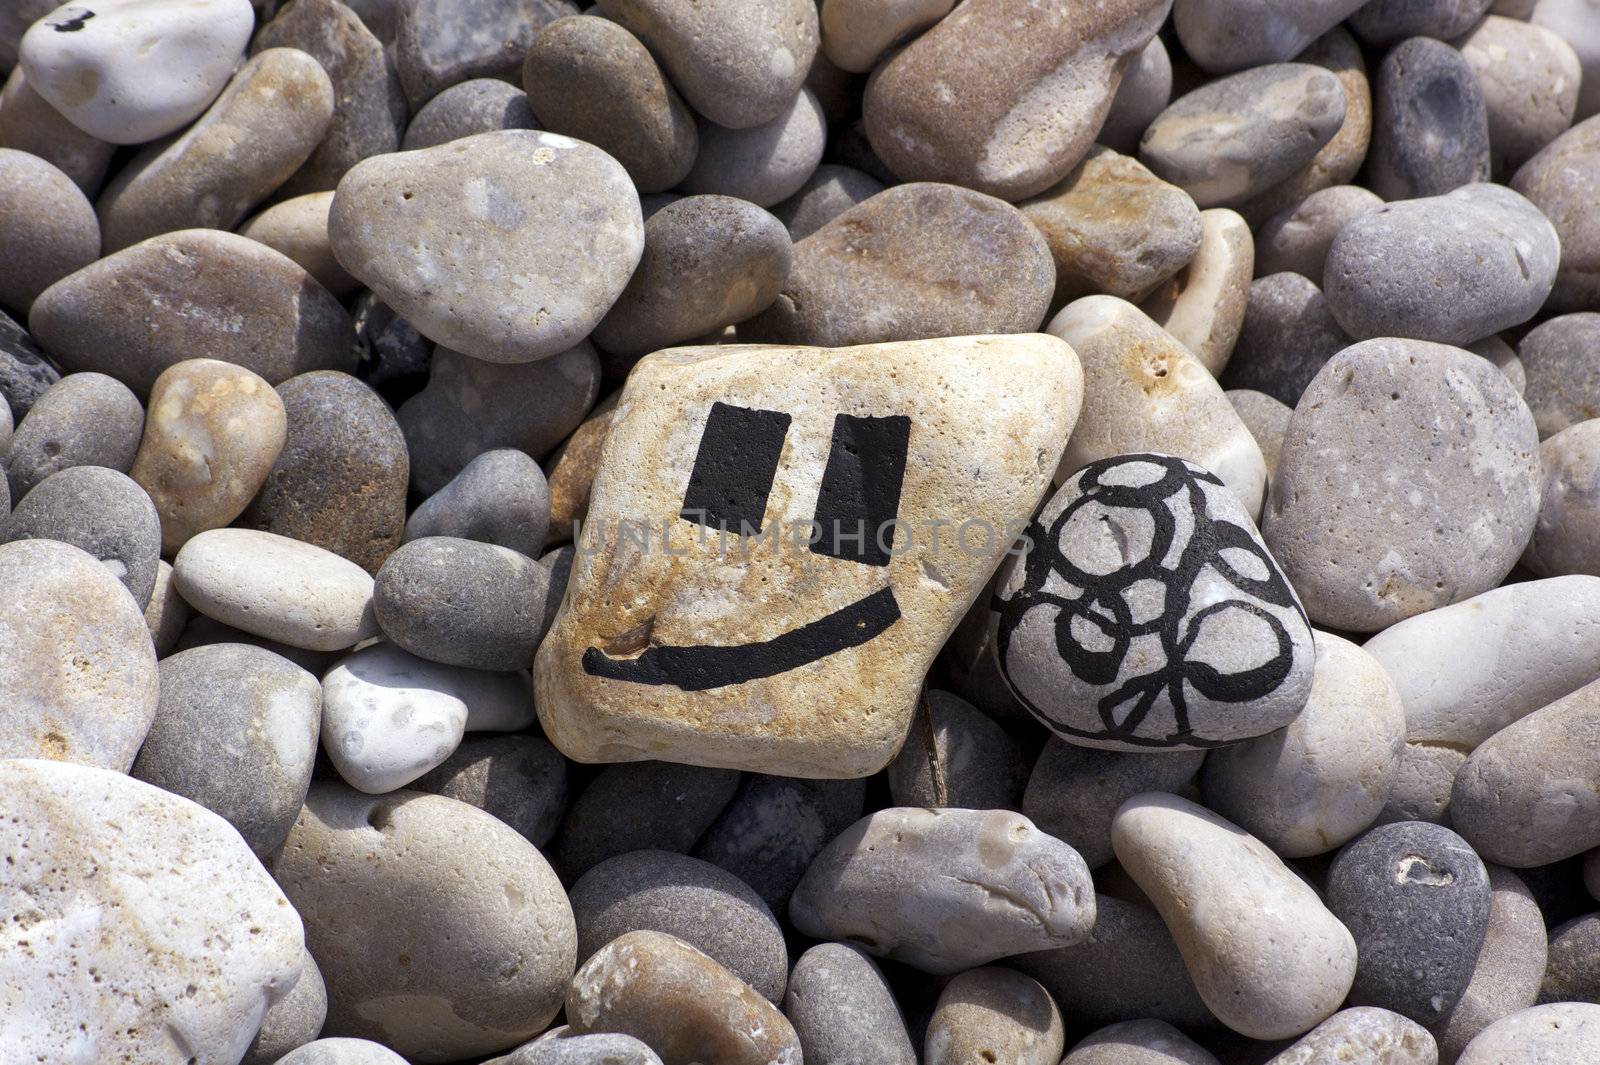 Two pebbles found on the beach at Beer in Dorset, England. Both pebbles are hand painted. one with a smiley face, the other with an abstract pattern. Both lie amongst other pebbles on the beach.